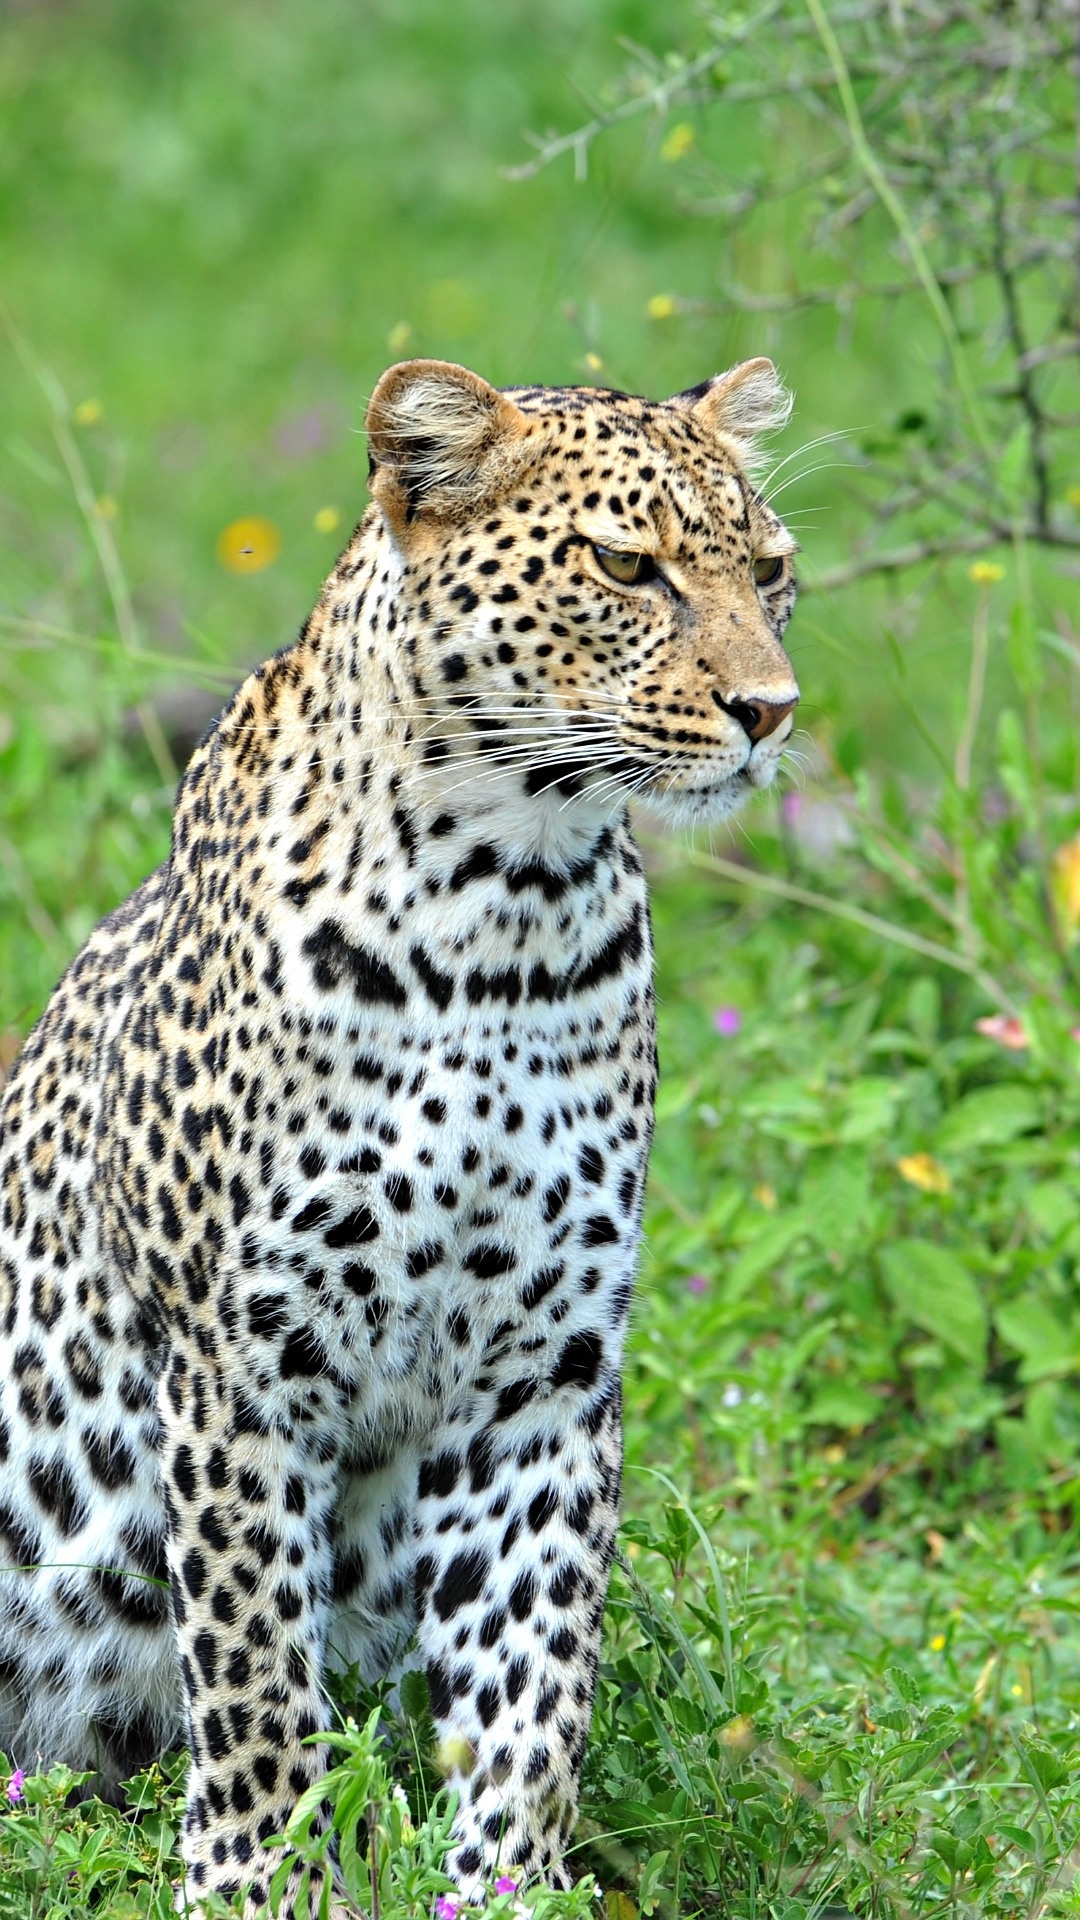 Leopard iPhone wallpapers, Mobile backgrounds, 1080x1920 Full HD Handy